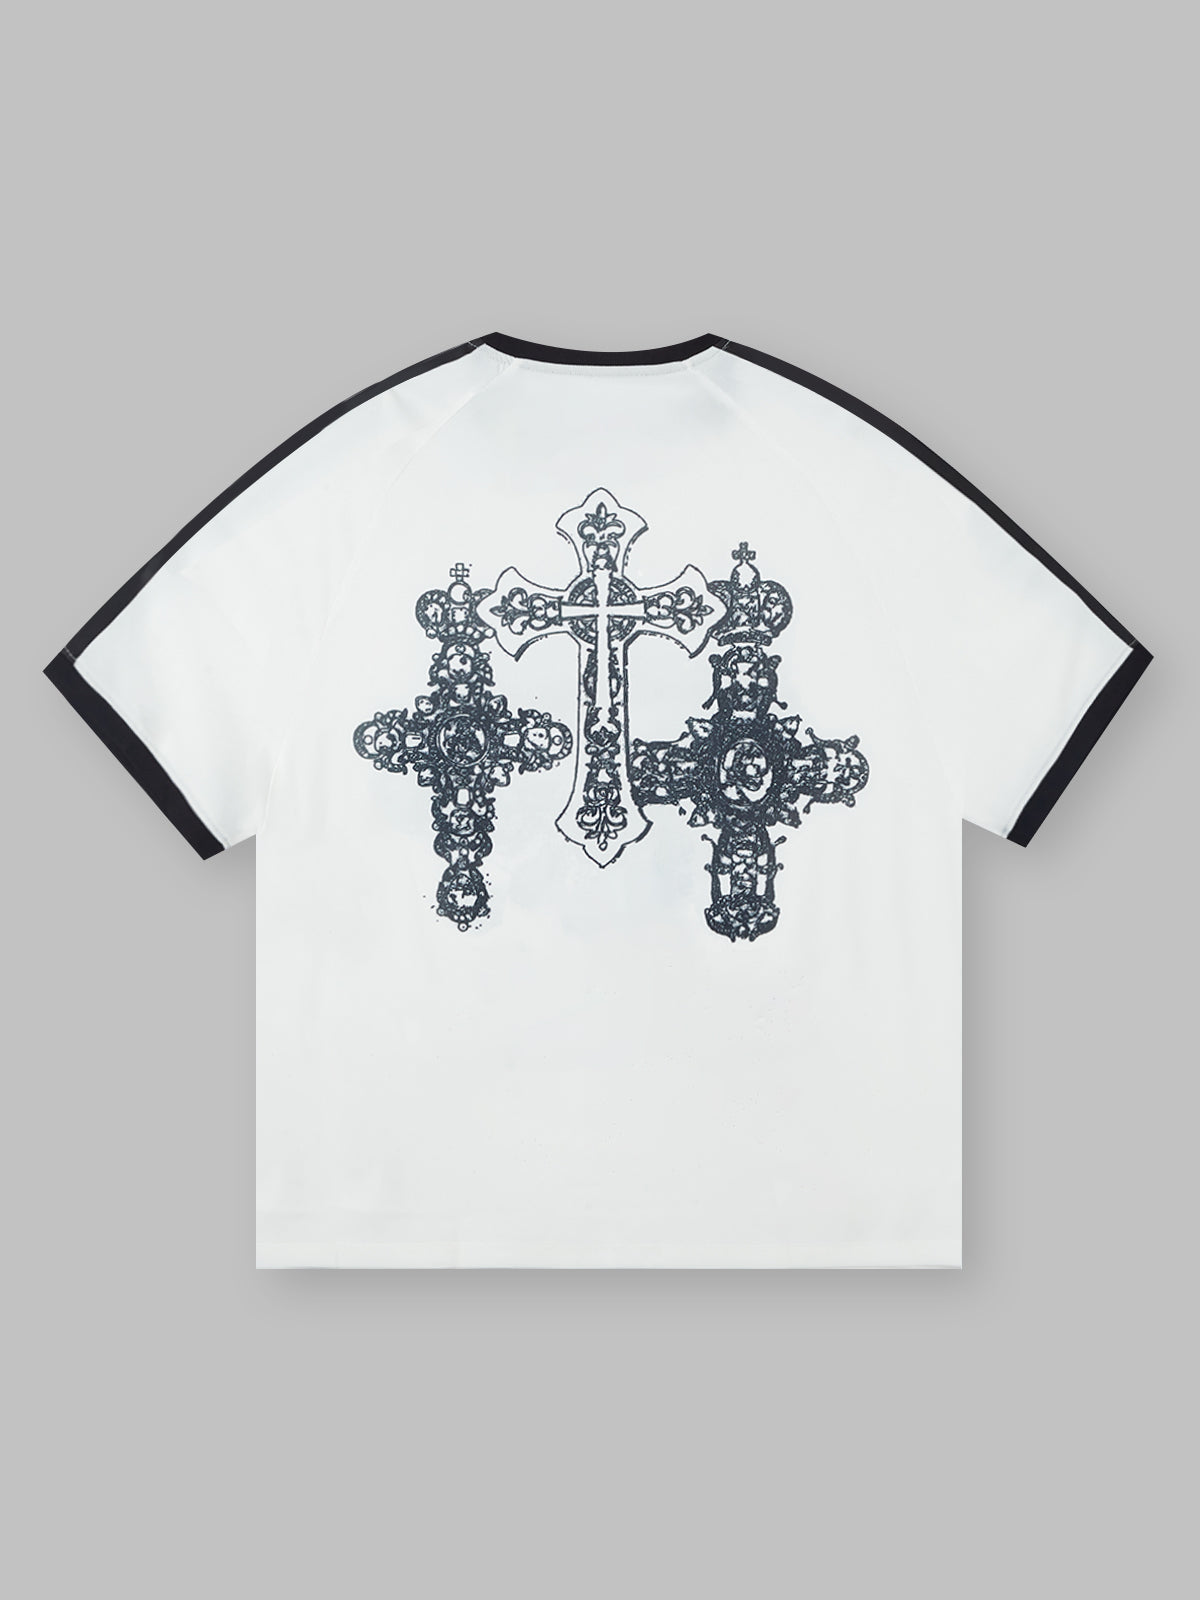 OBSTACLES & DANGERS© The Thorns Cross Movement T-shirt